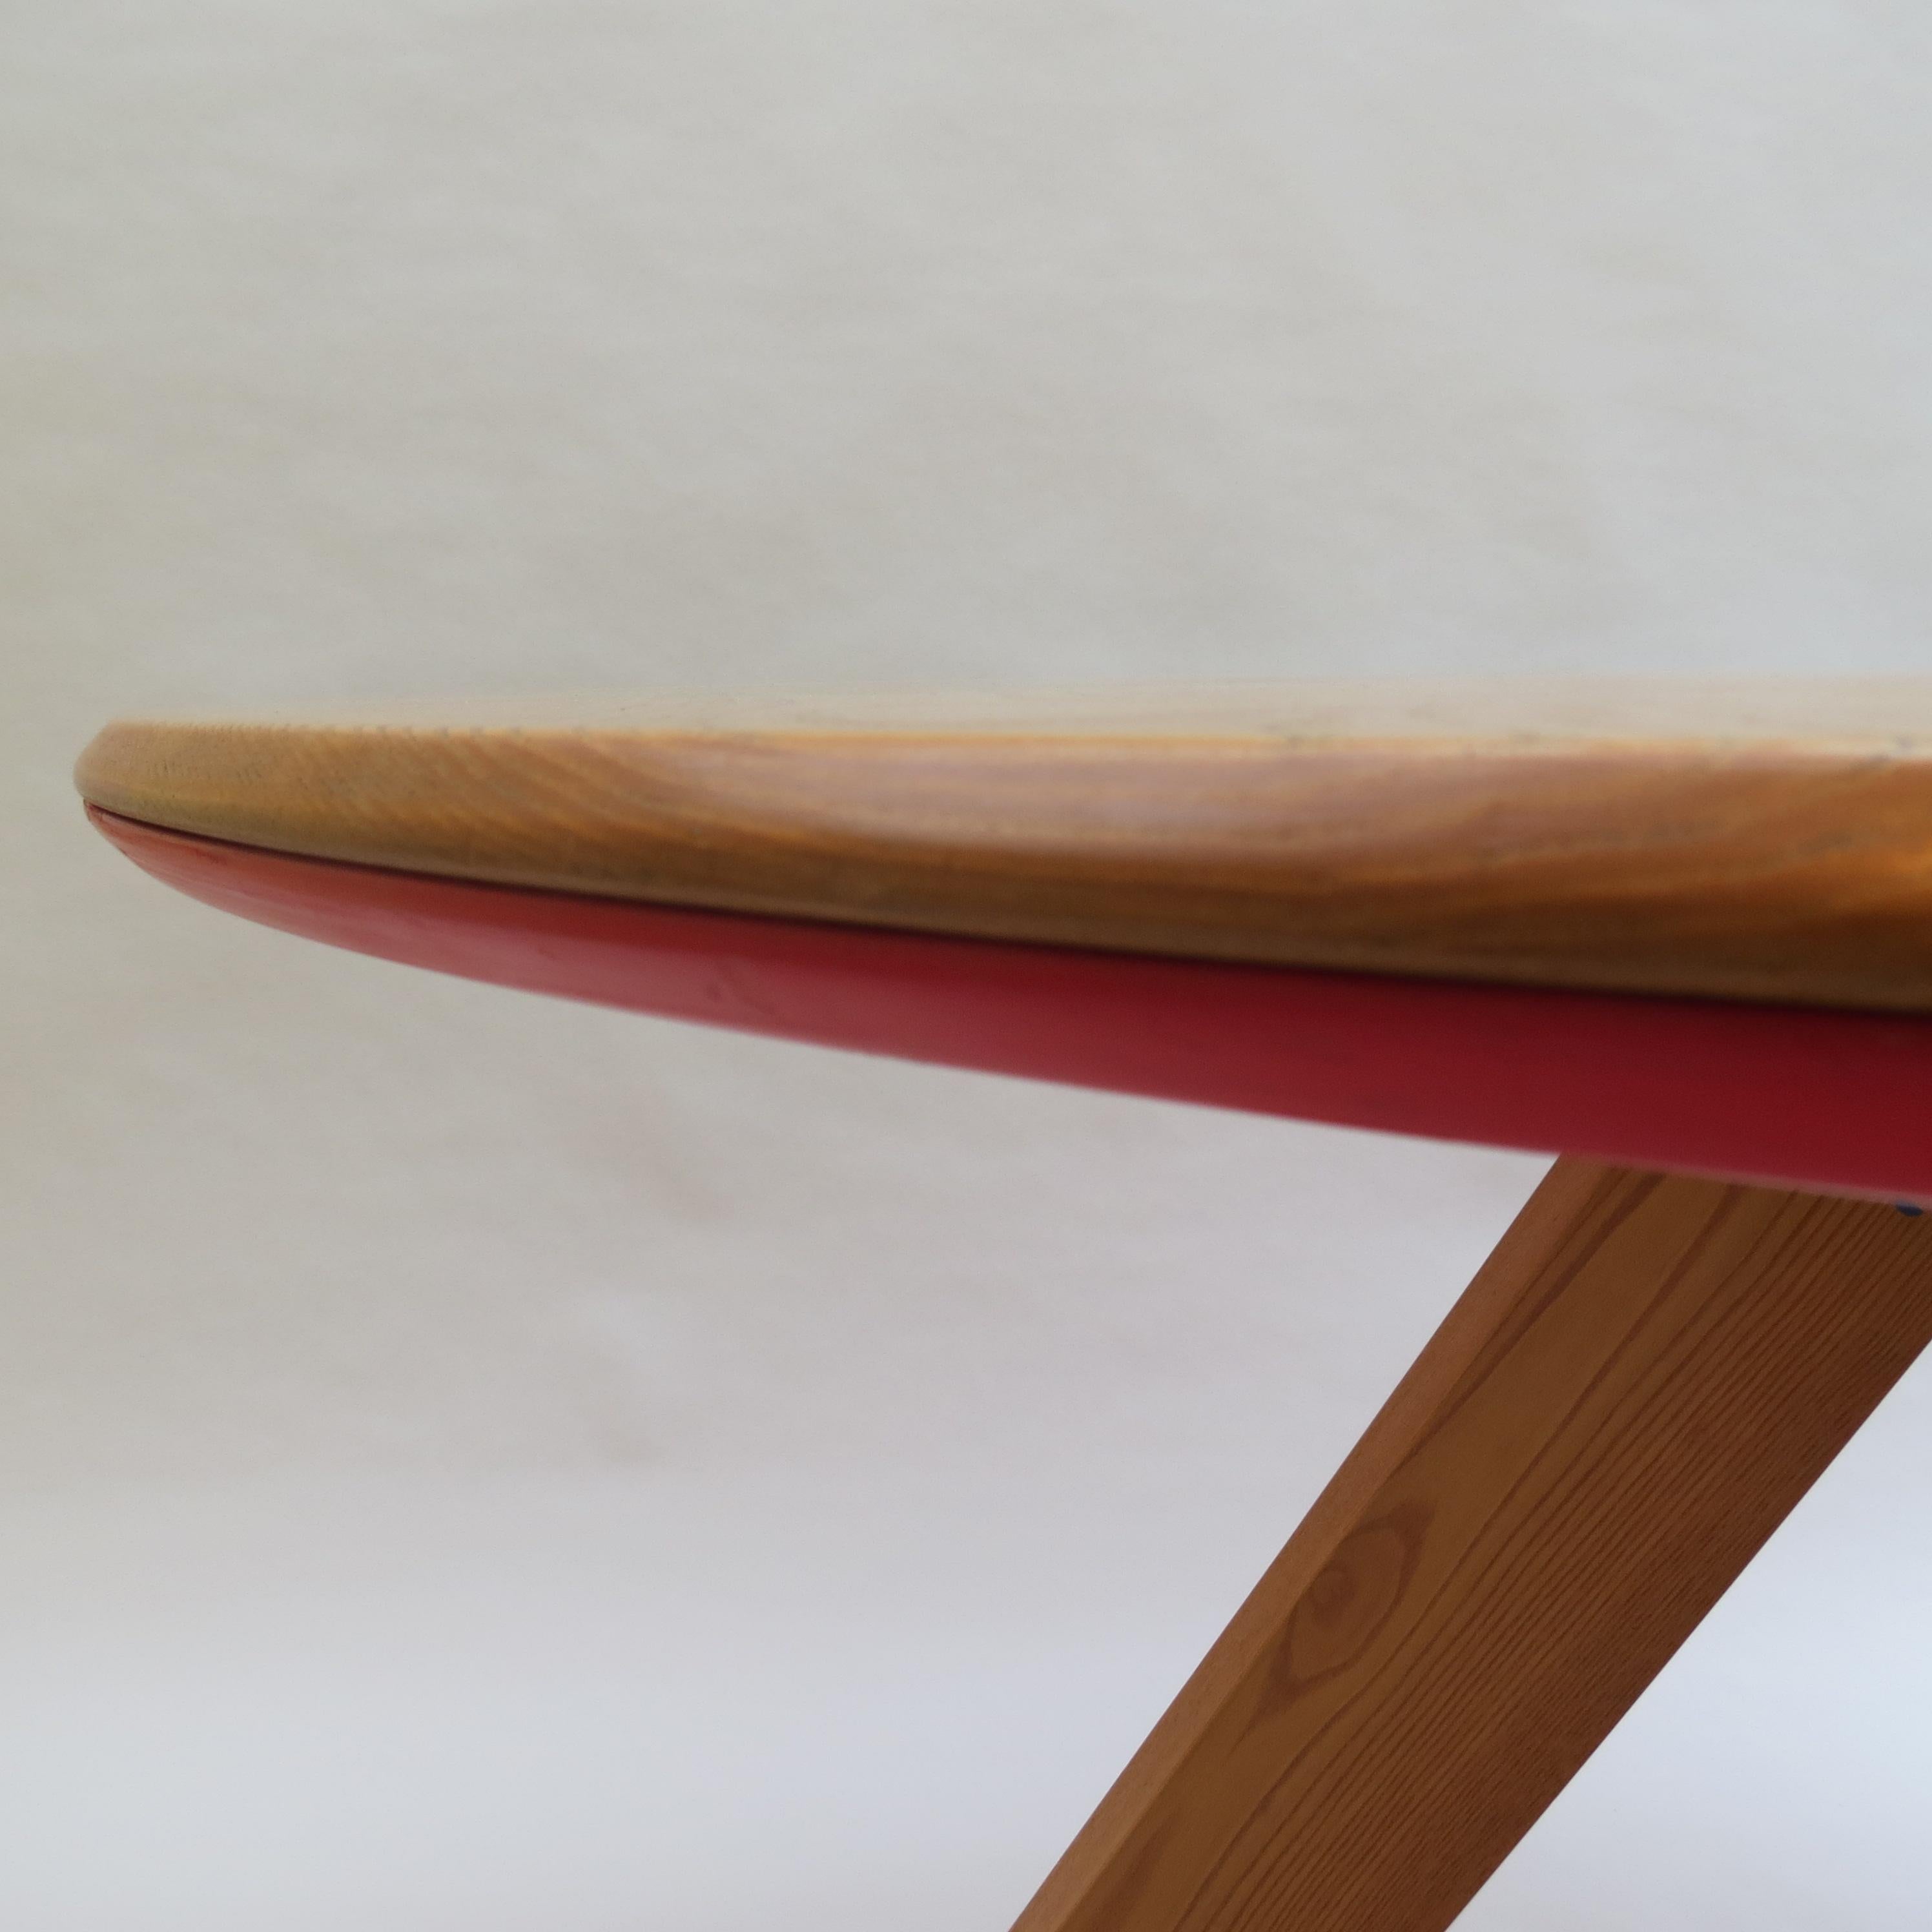 20th Century Midcentury Bespoke Round Dining Table by David Field 1980s with Red and Blue Det